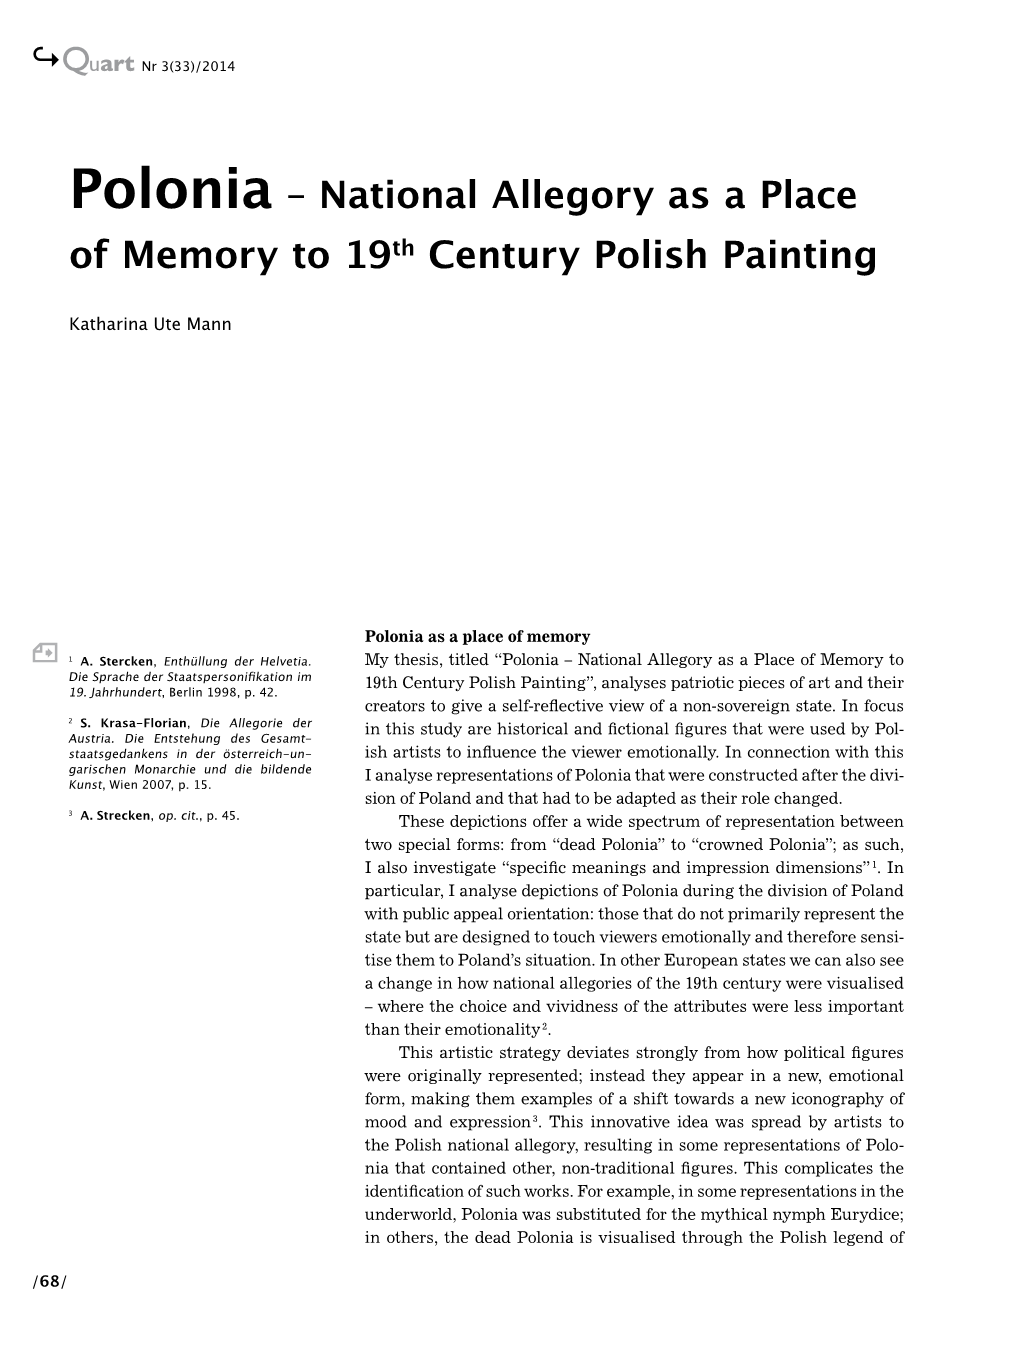 Polonia – National Allegory As a Place of Memory to 19Th Century Polish Painting